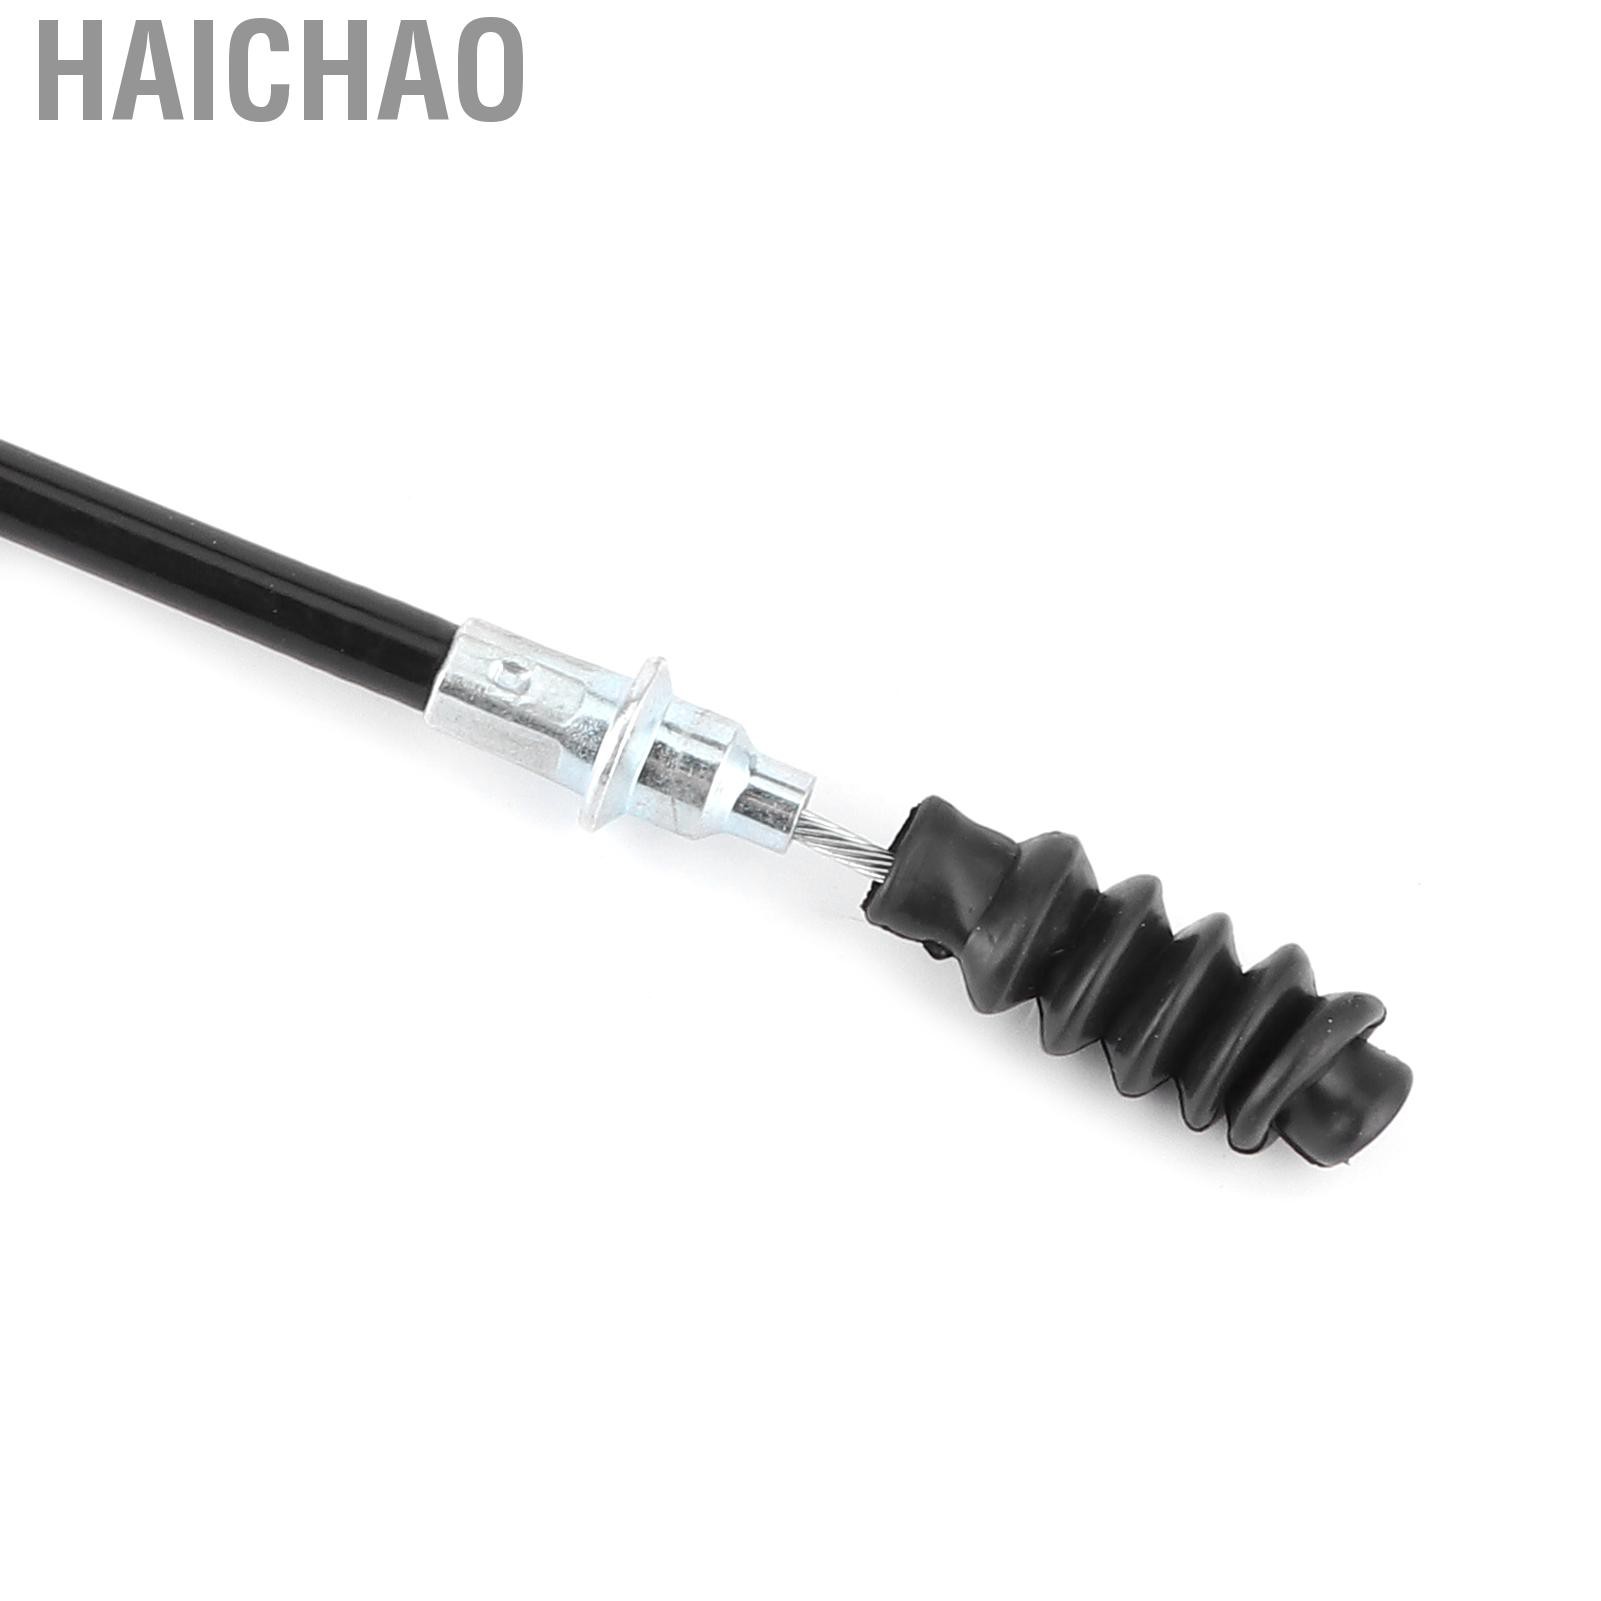 Dây Cáp Ly Hợp Haichao 920mm / 36.2in 75mm / 3in Cho Pit Pro Dung Bike 125cc 140cc 150cc